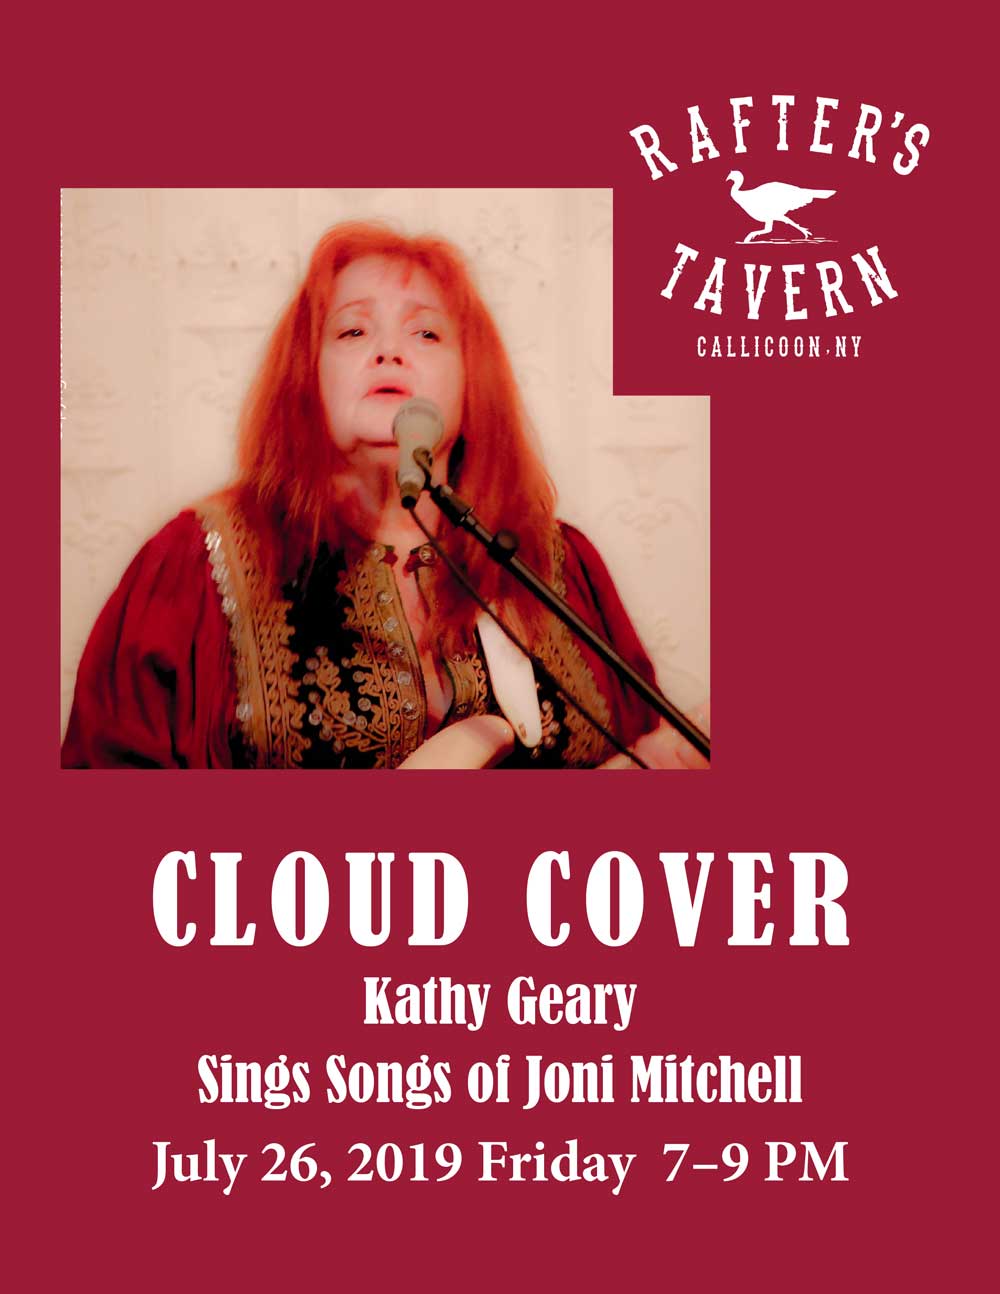 CLOUD COVER Kathy Geary Sings the Songs of Joni Mitchell